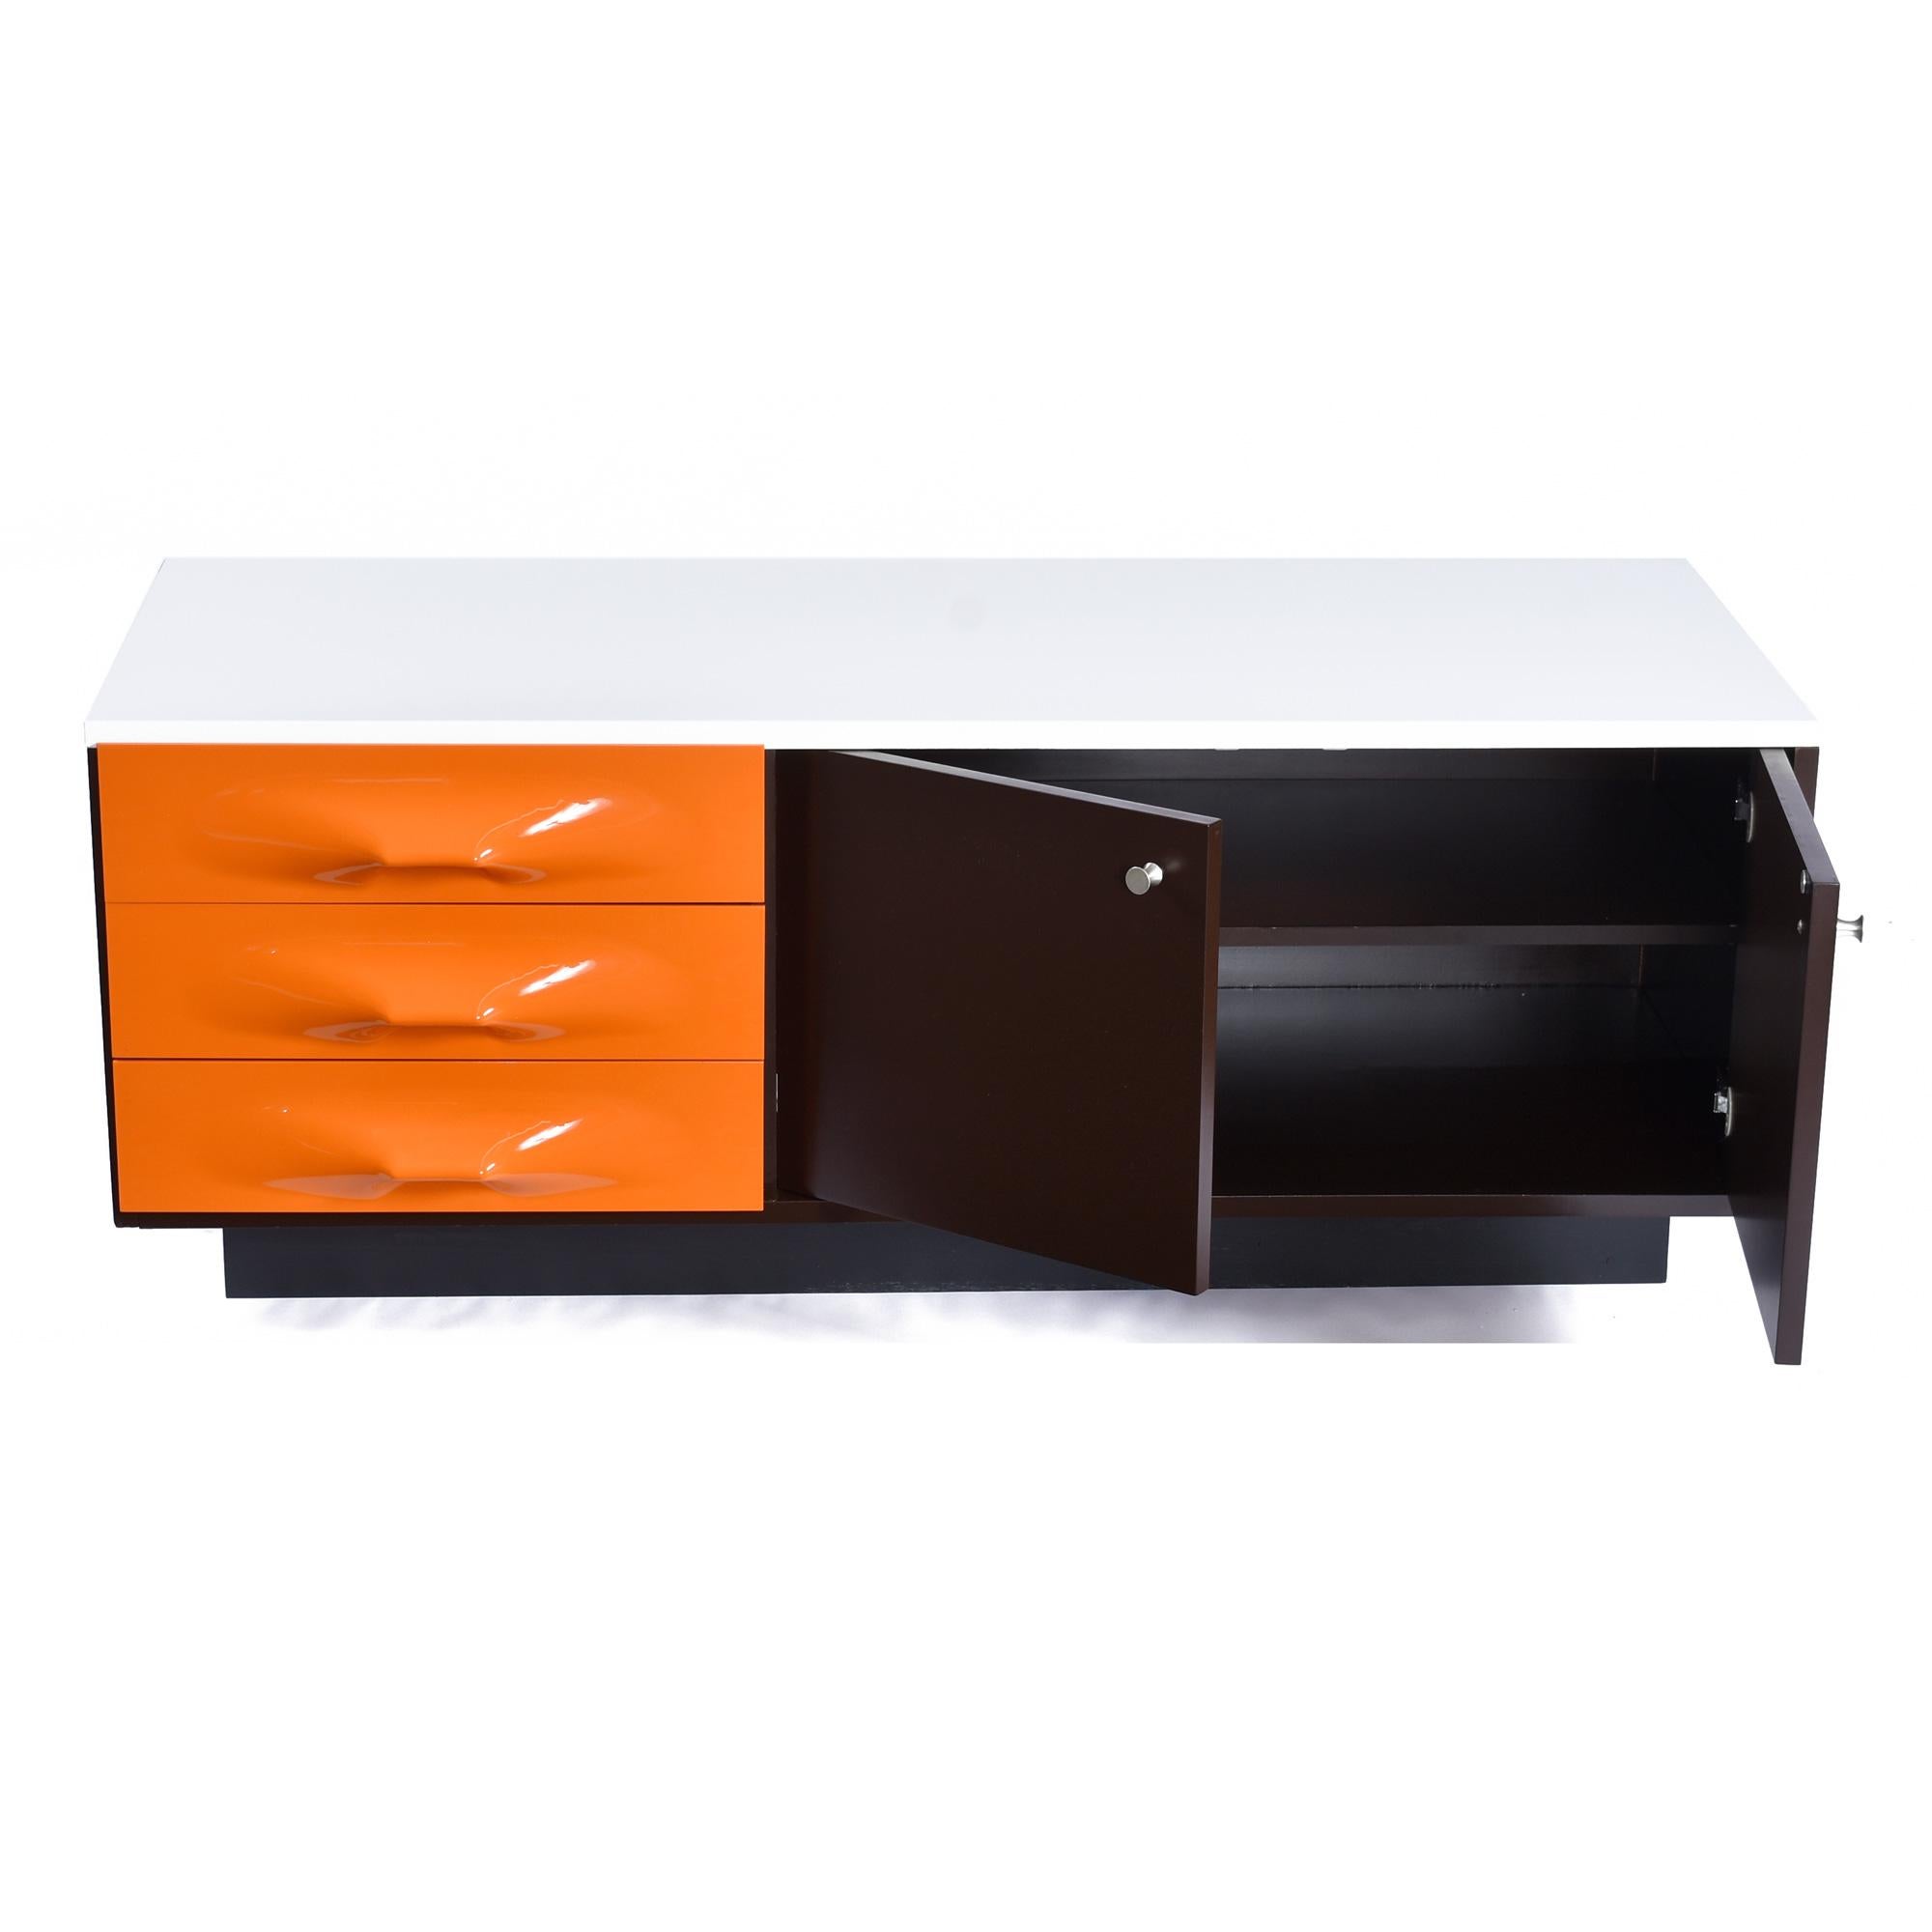 Molded Raymond Loewy DF-2000 Orange Plastic Drawer Media Cabinet Credenza For Sale